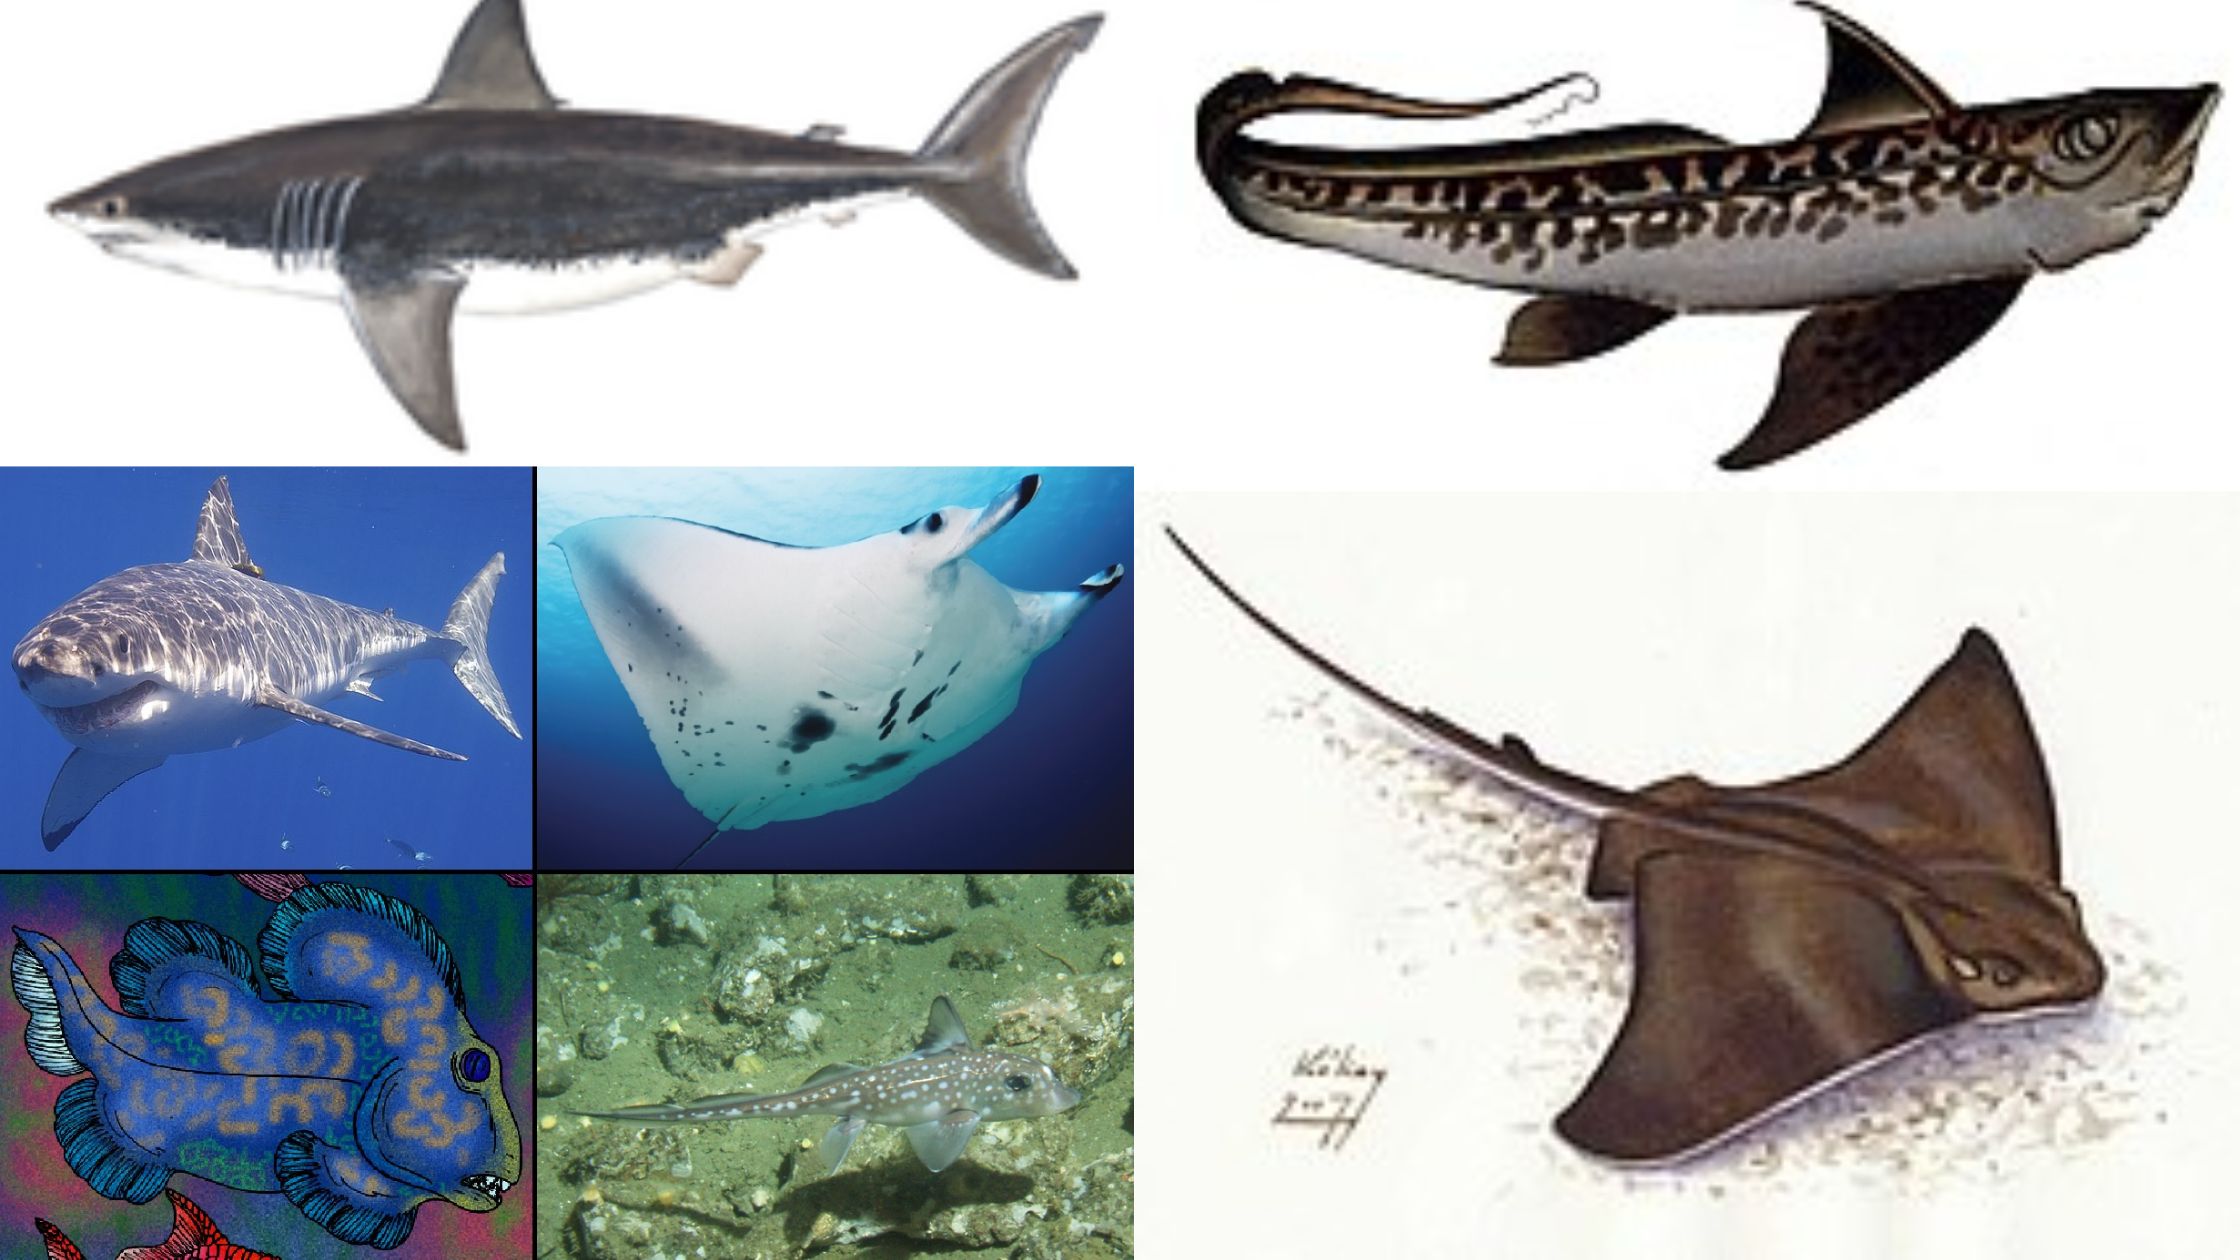 Chondrichthyes - Characteristics, Classification & Examples